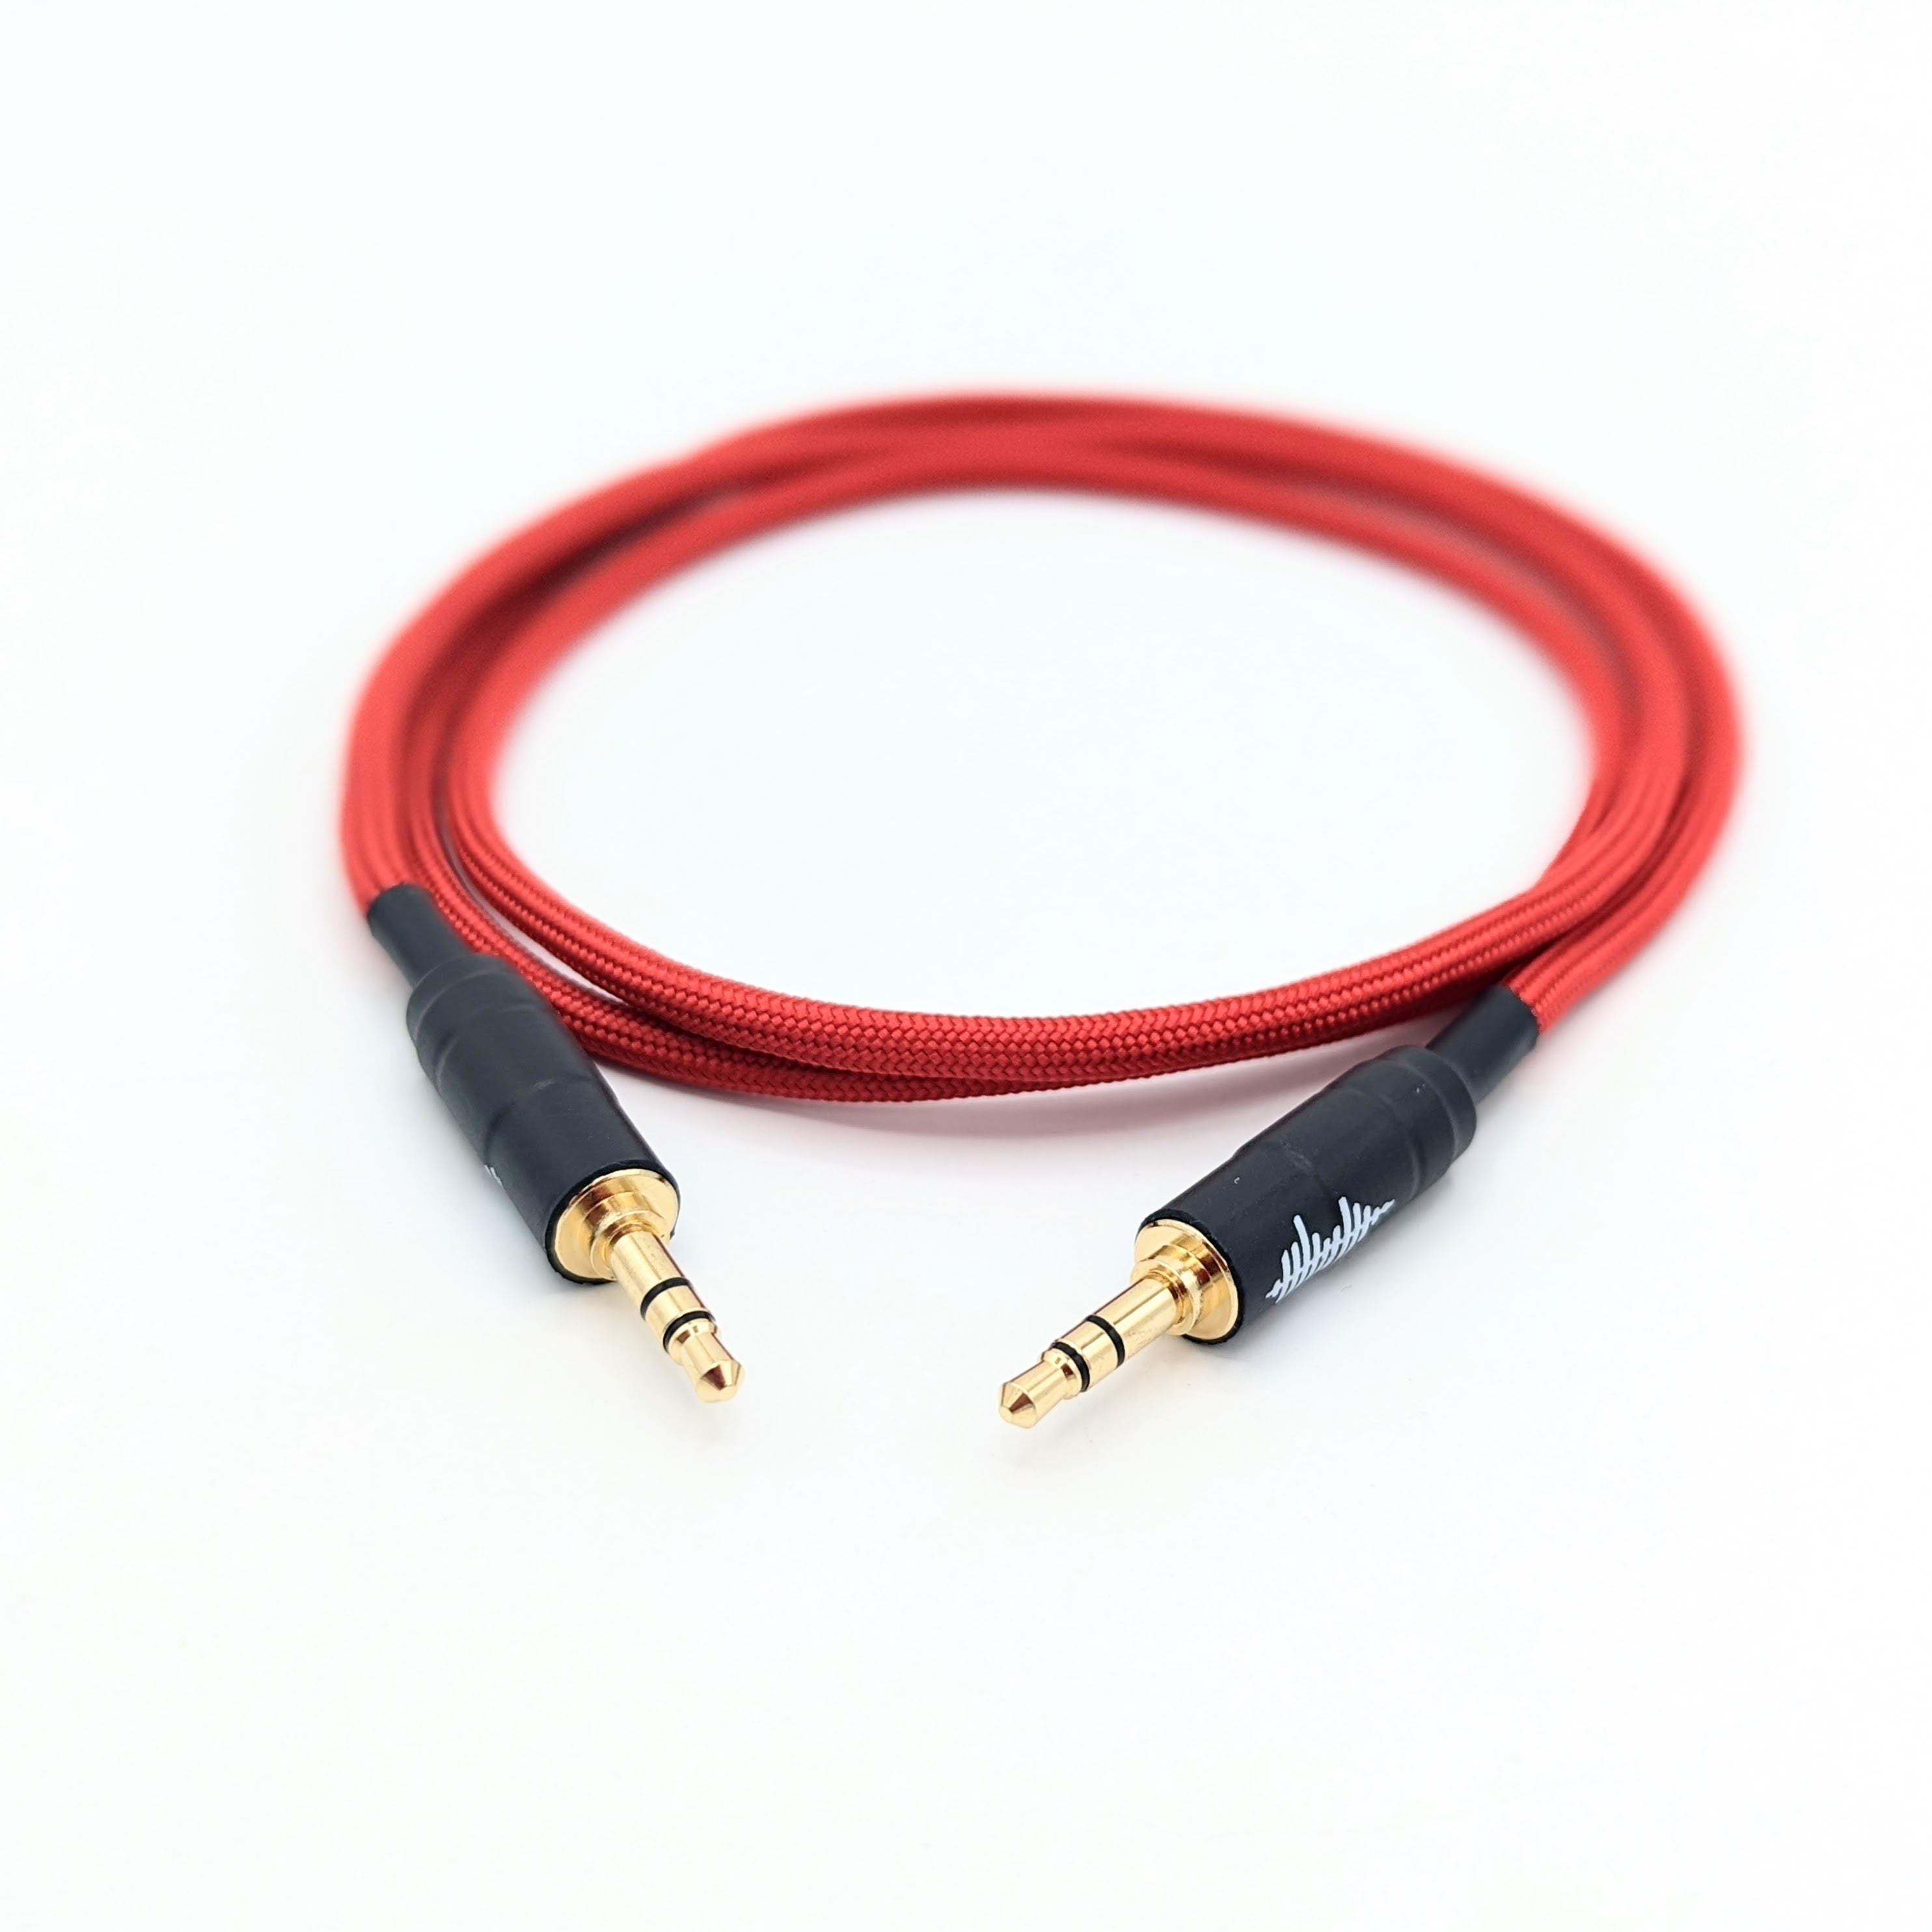 TC-4: 3.5mm to 3.5mm (Basic Auxiliary Cable)